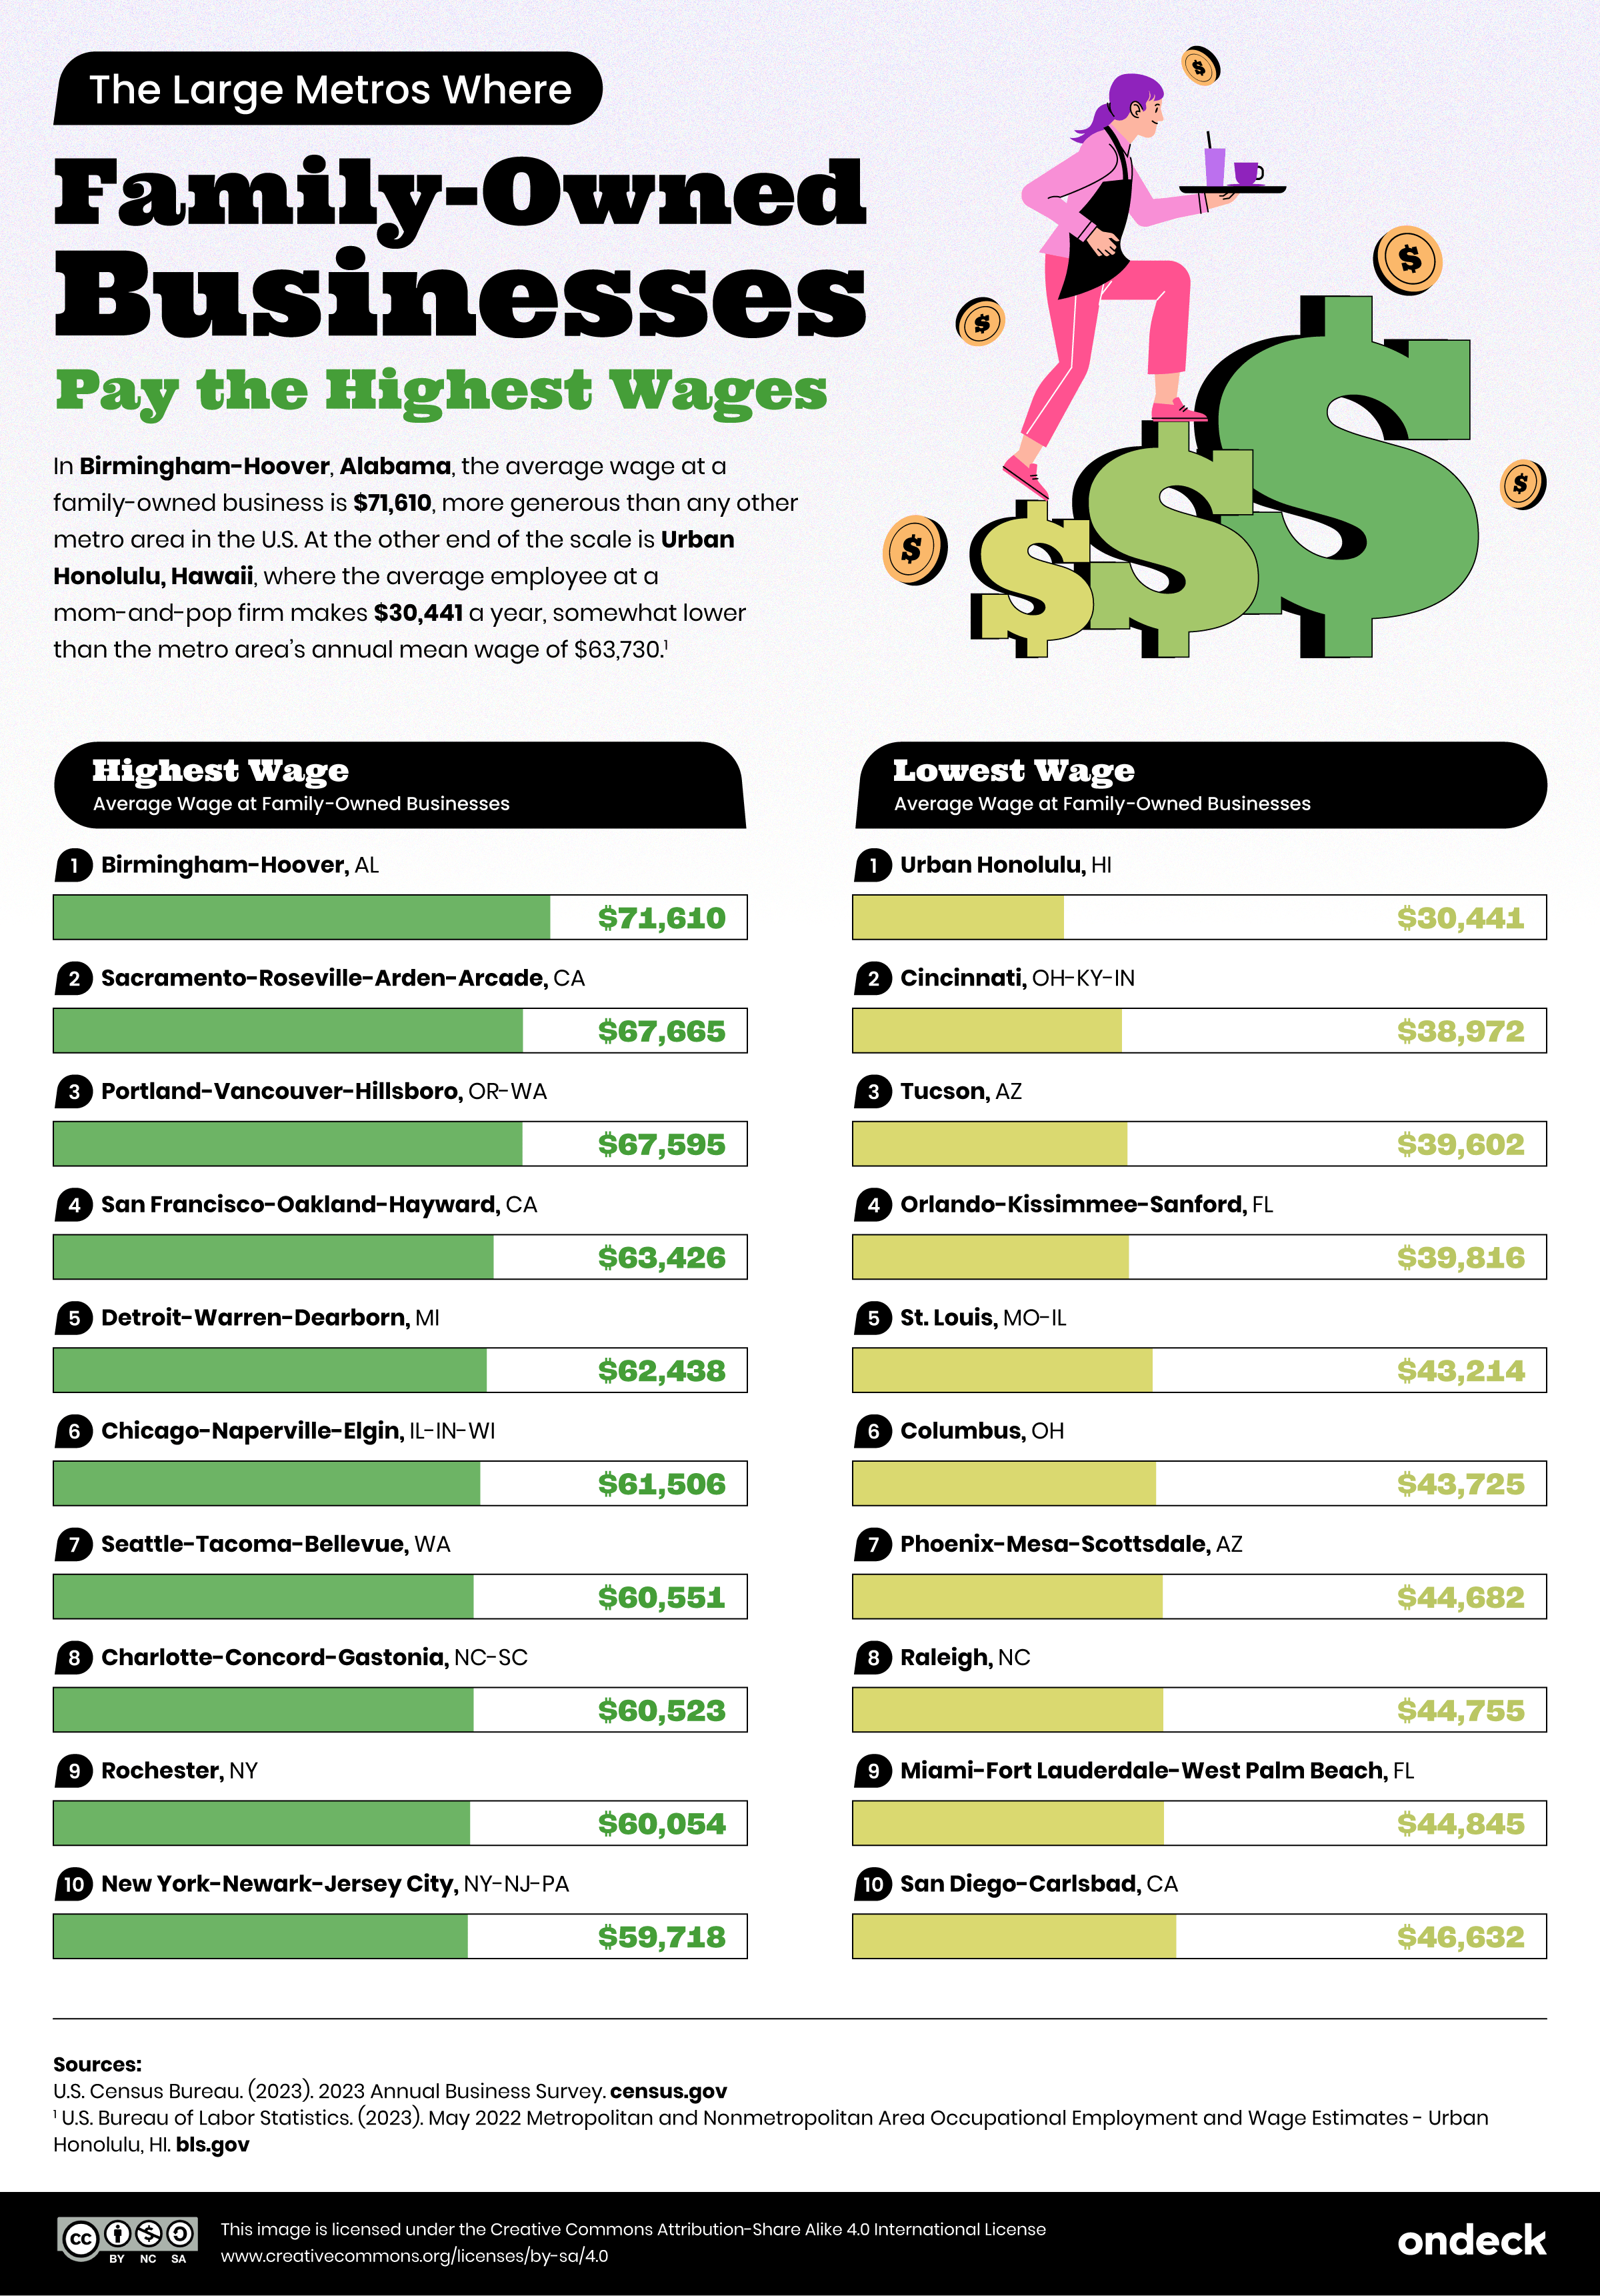 Infographic showing the large metro areas where family owned businesses pay the highest wages